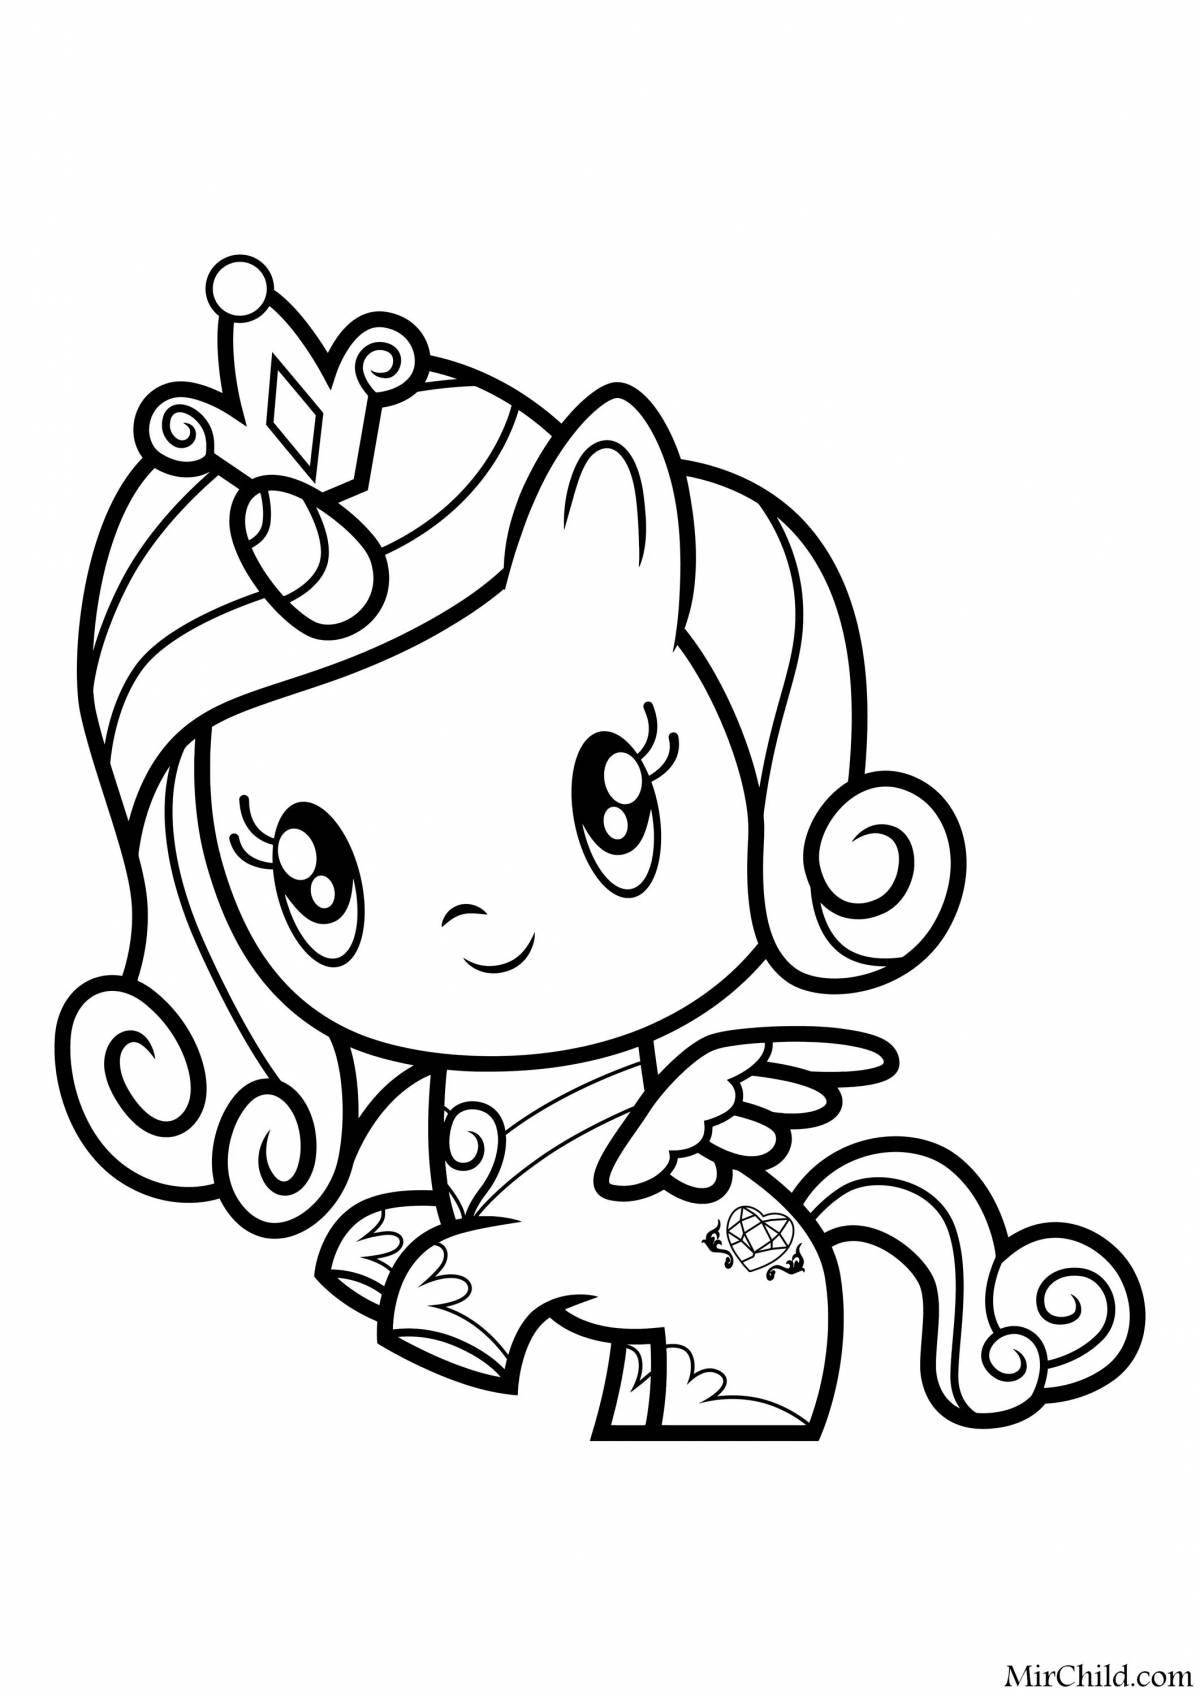 Adorable cute pony coloring pages